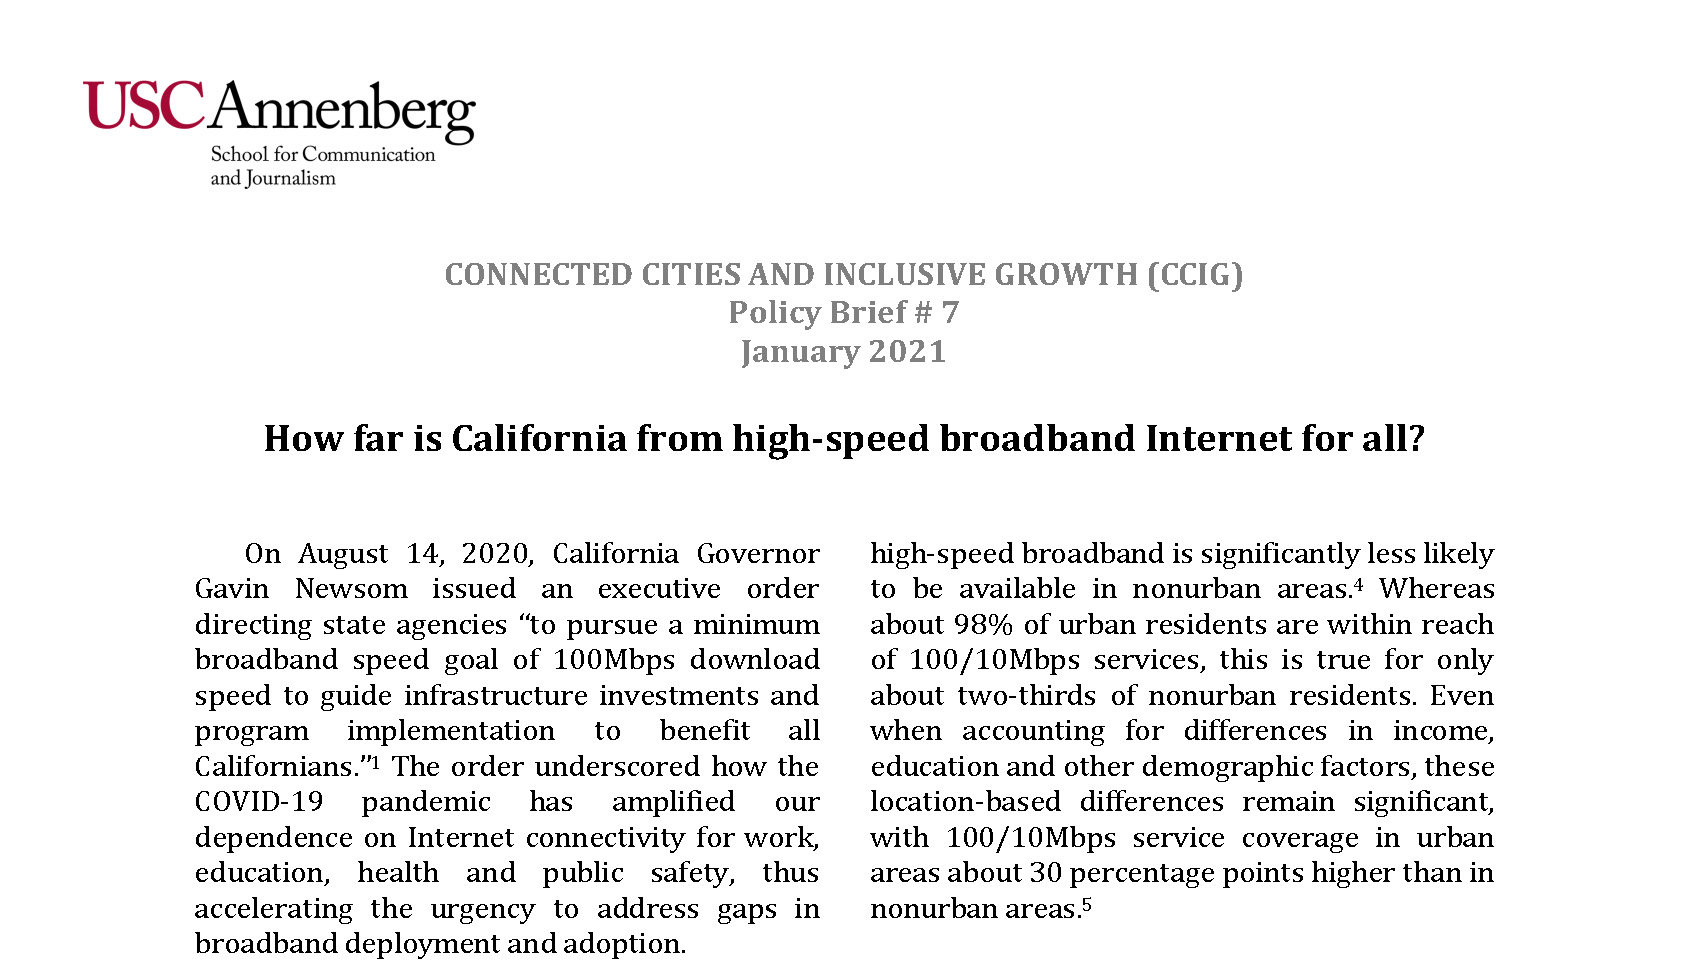 How Far is California From High-Speed Broadband Internet for All?